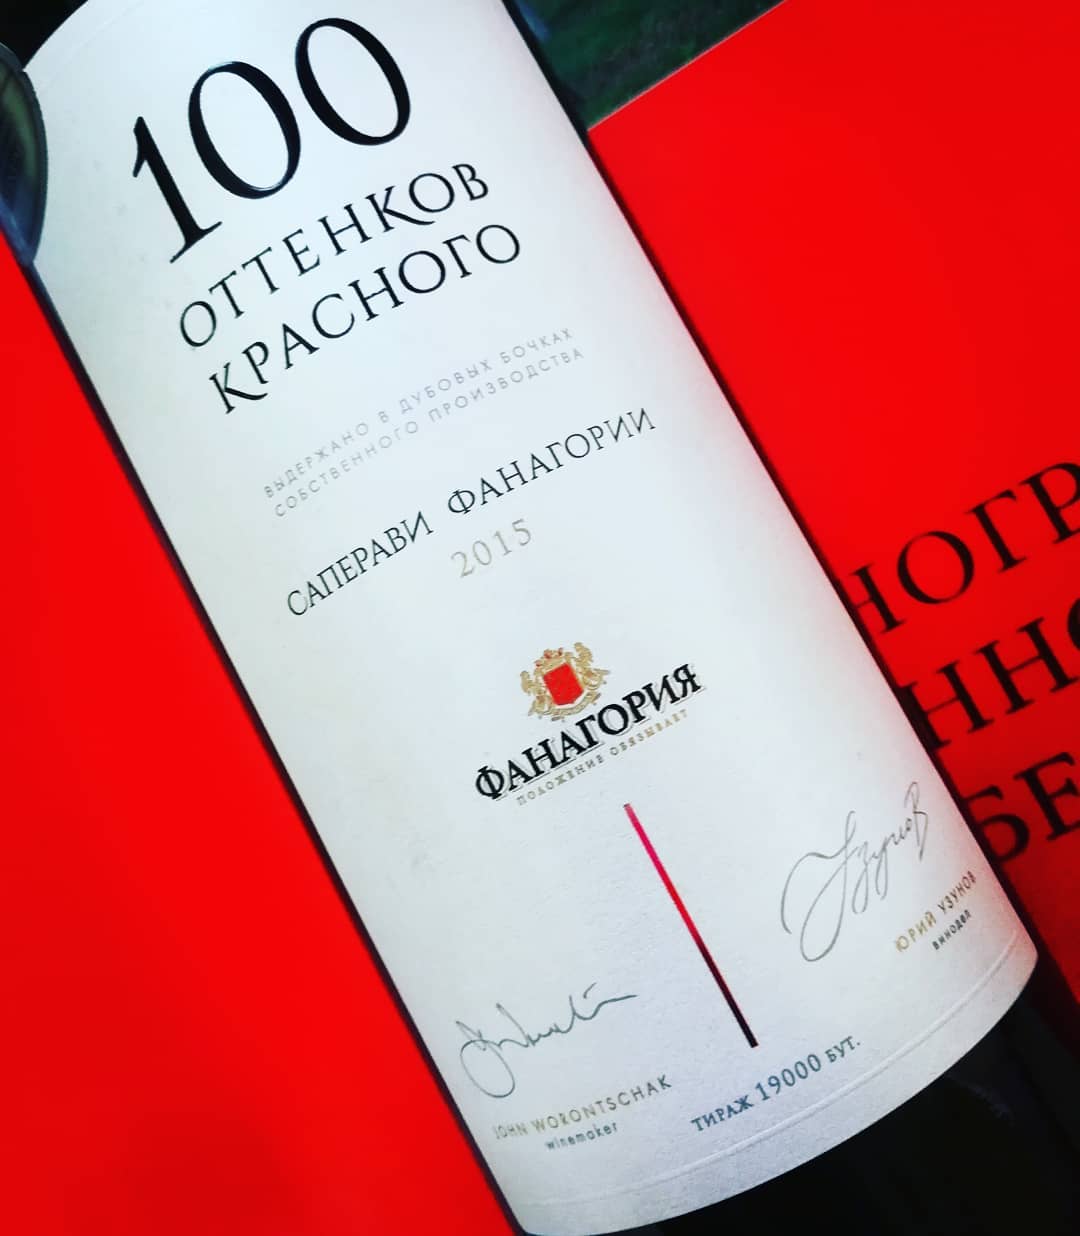 Absolute Russian champion - '100 shades of red Saperavi Fanagoria 2015' 